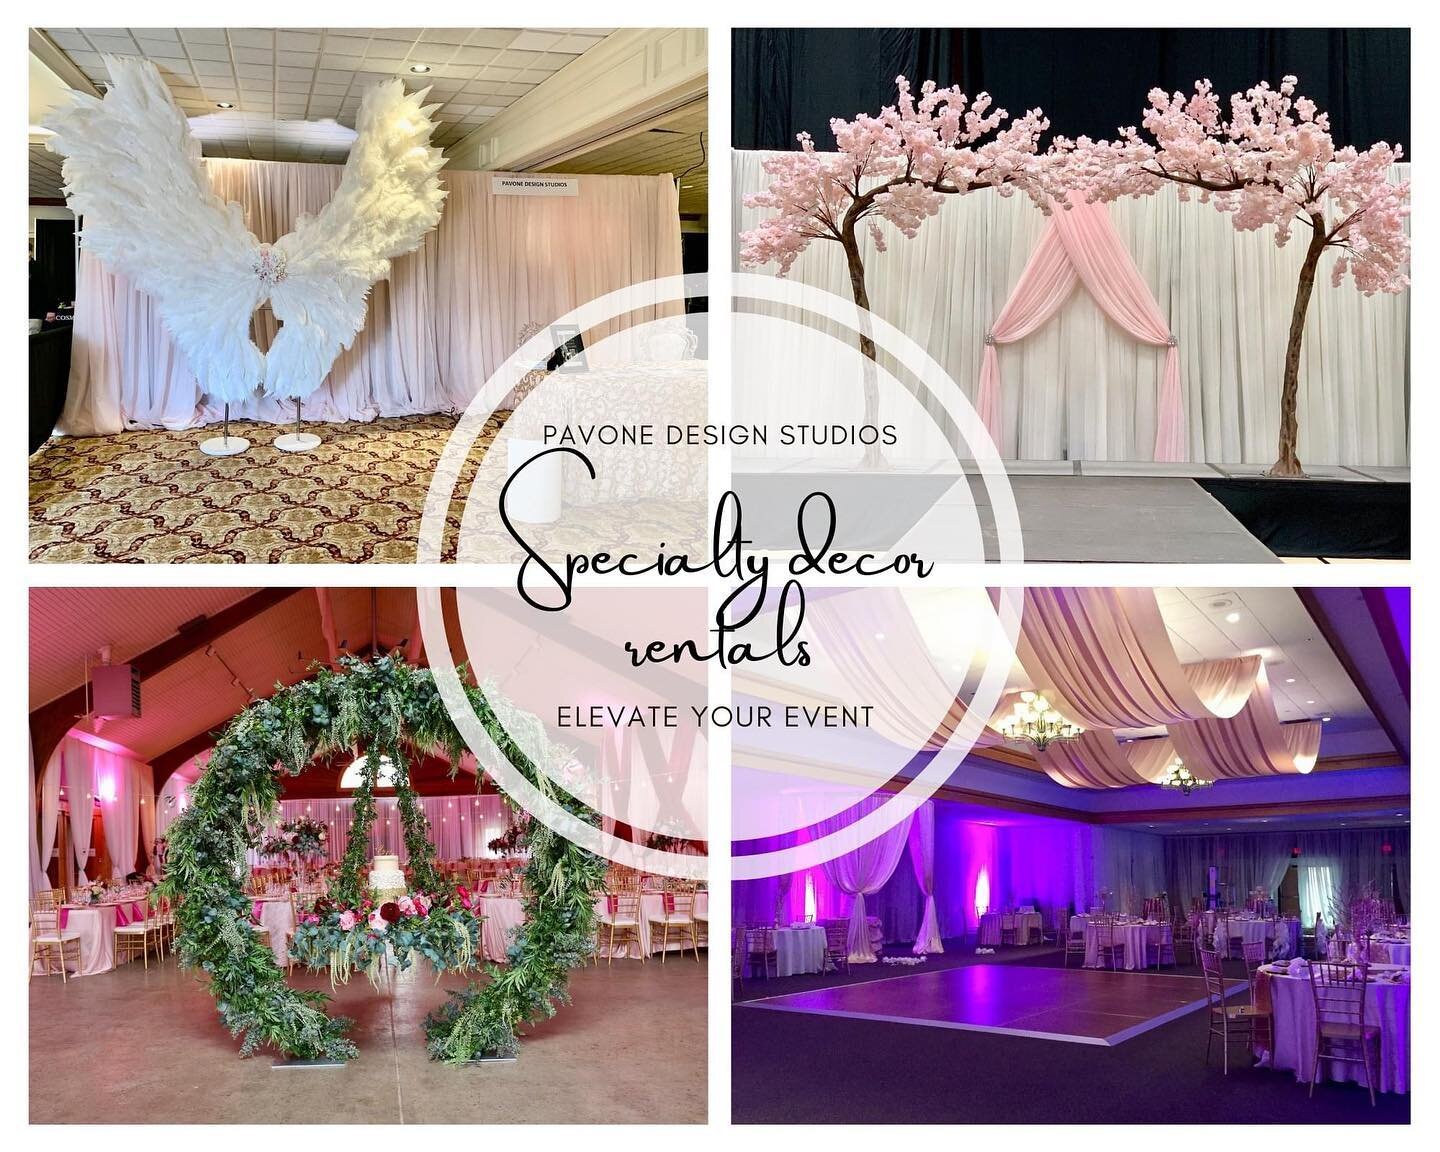 Elevate your event space with our amazing decor rentals. Weddings, baby showers, bridal shower, birthdays, etc. Take your event to the next level with that wow factor!